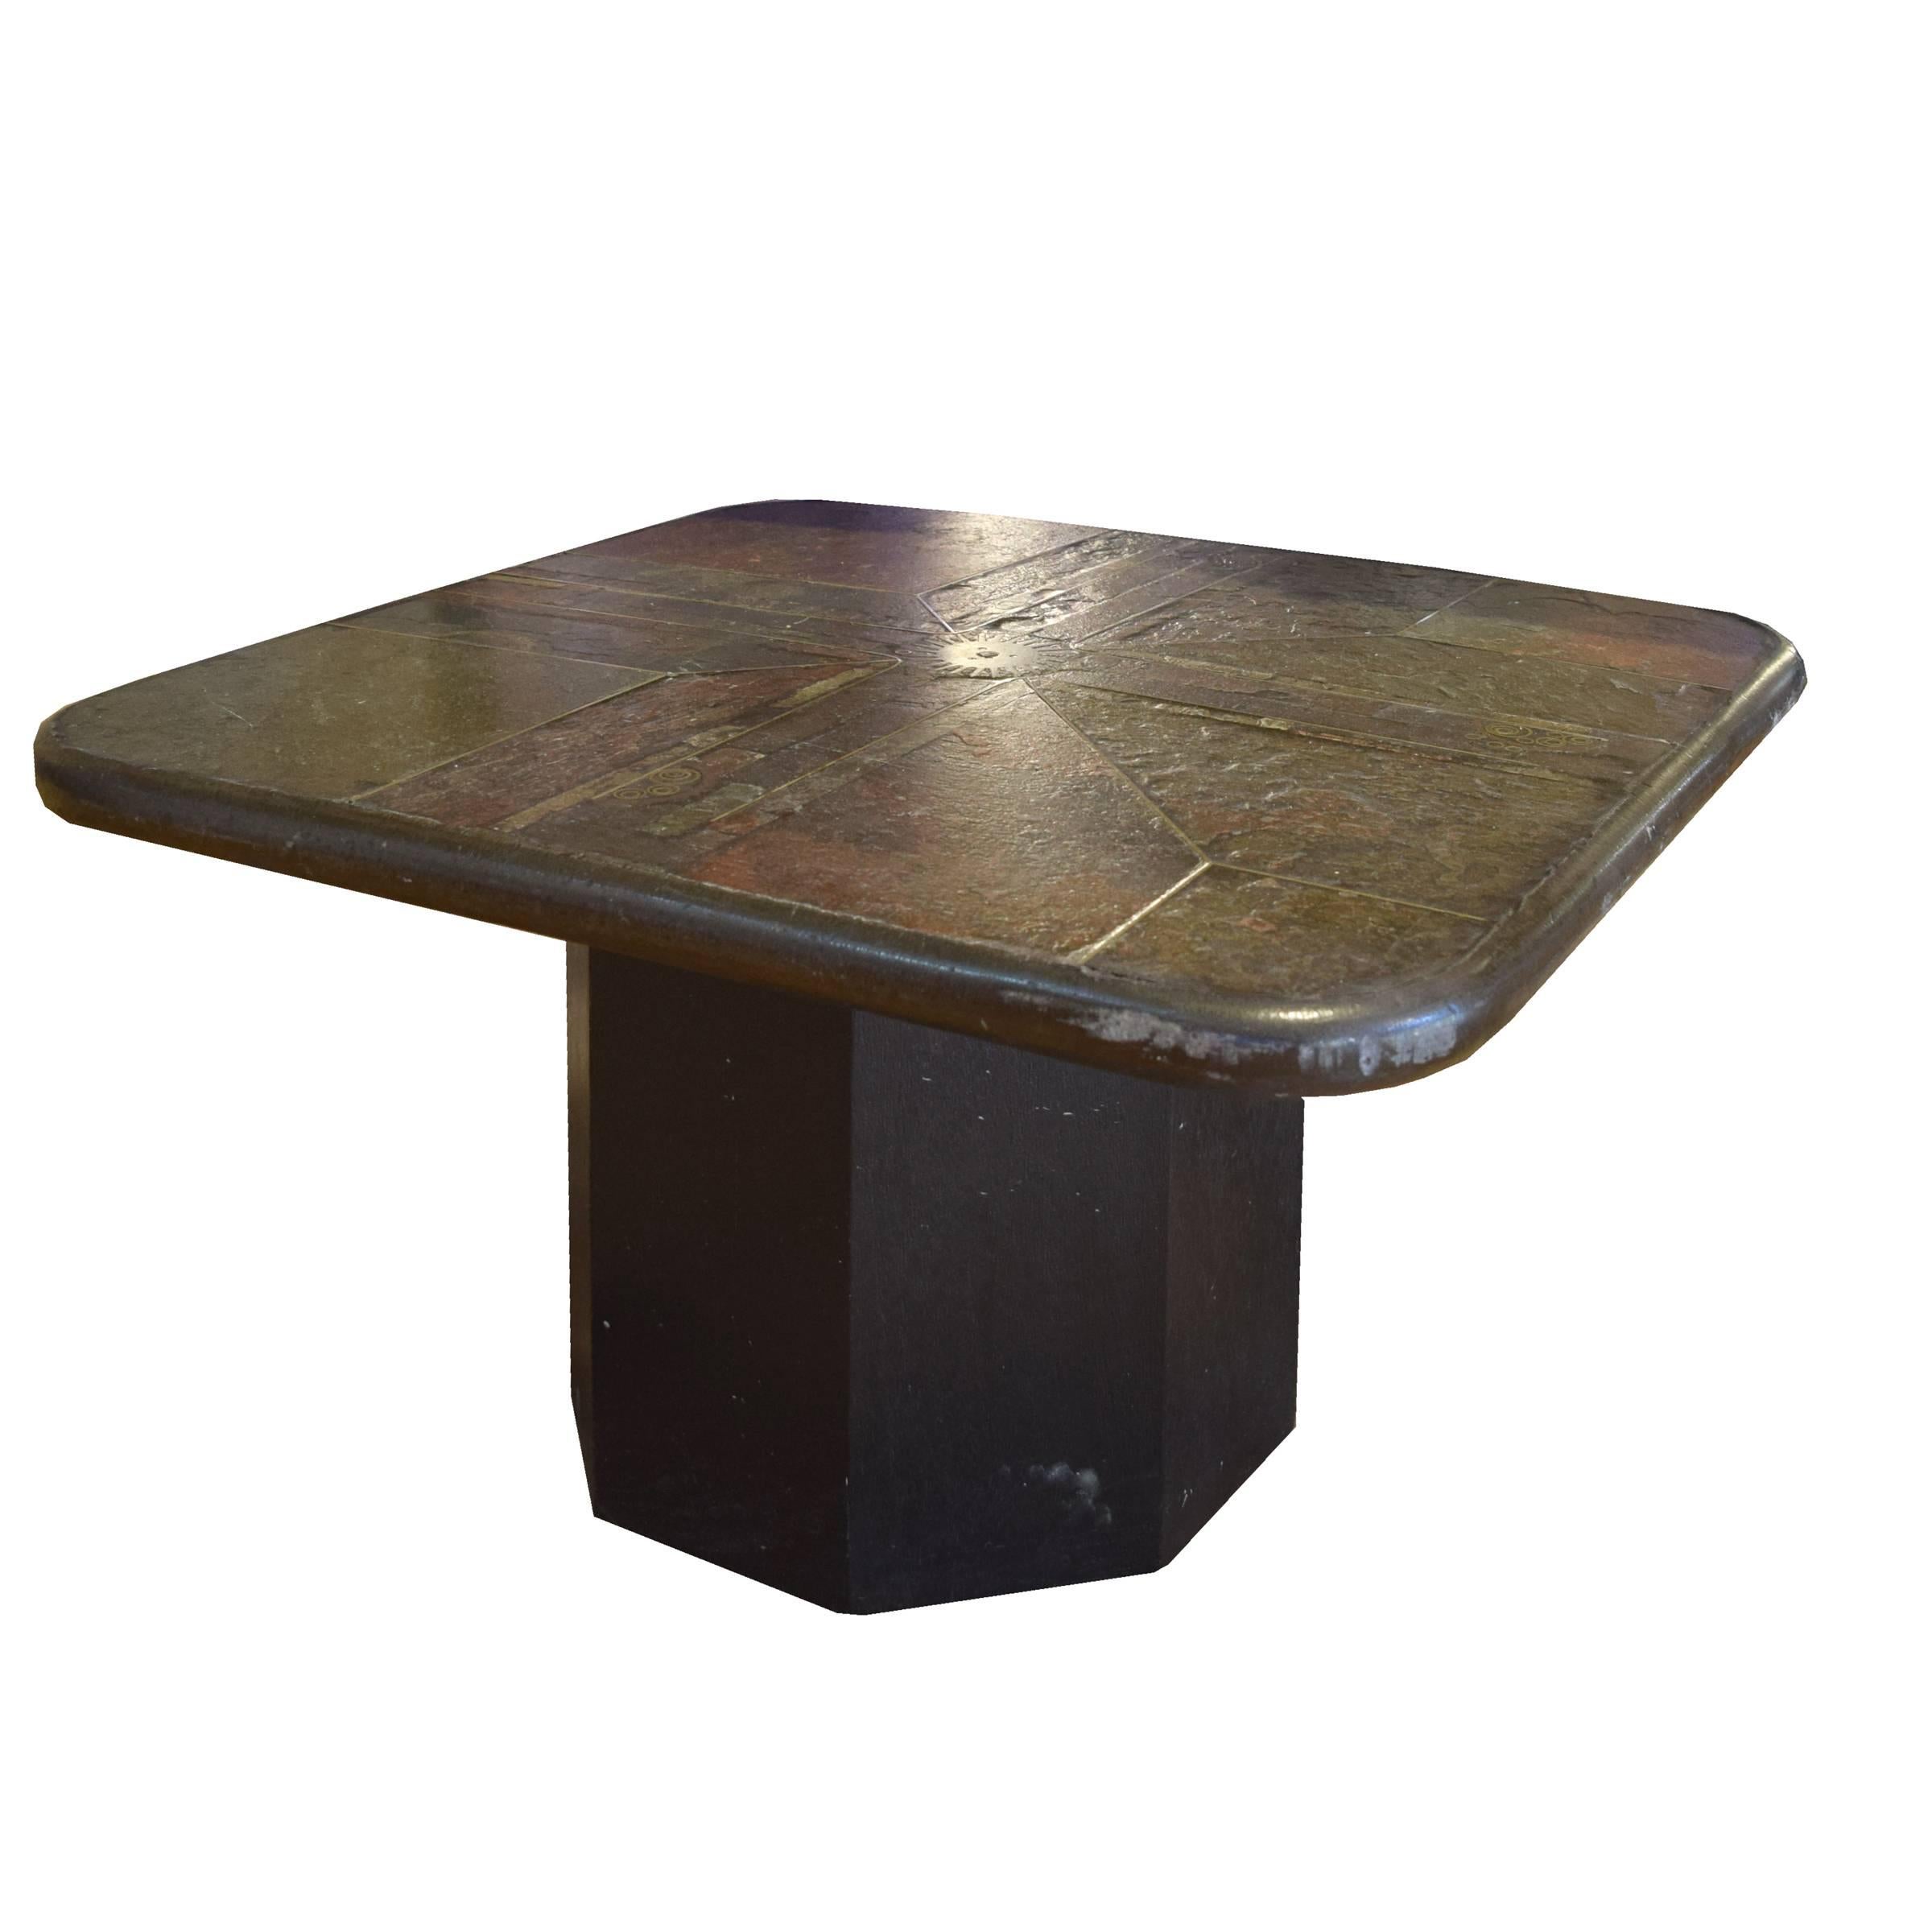 A great coffee table by Dutch artist Marcus Kingma with a mosaic stone top with brass inlaid details on a hexagonal wood base. Signed 'M. Kingma '90'.
 